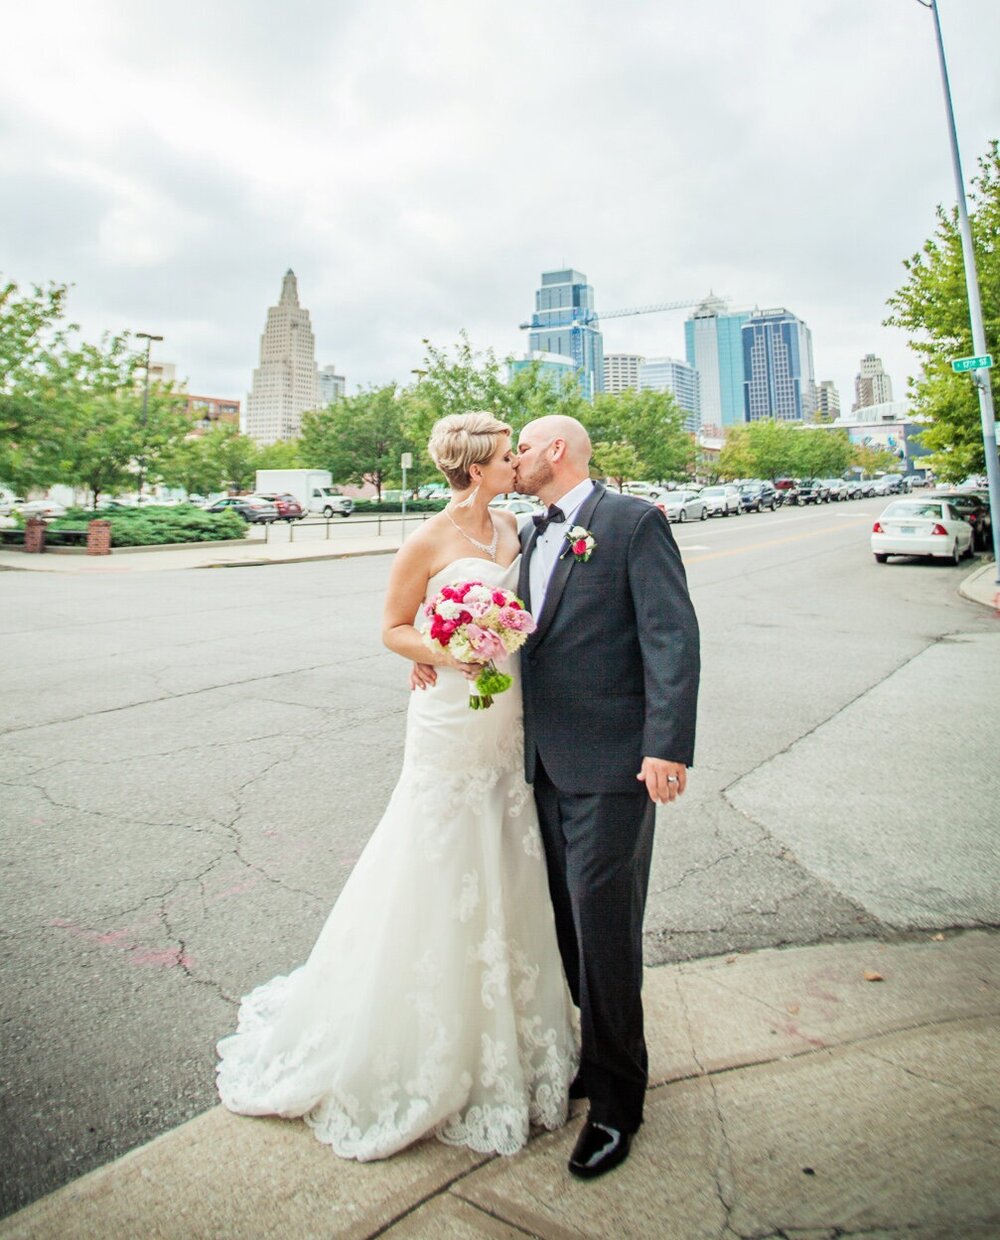 Which Wedding Venue is The One for You: The Vow Exchange Chapel in the KC Crossroads or The Chapel on the Corner in Liberty, MO? Melanie &amp; David Small Wedding KC Skyline